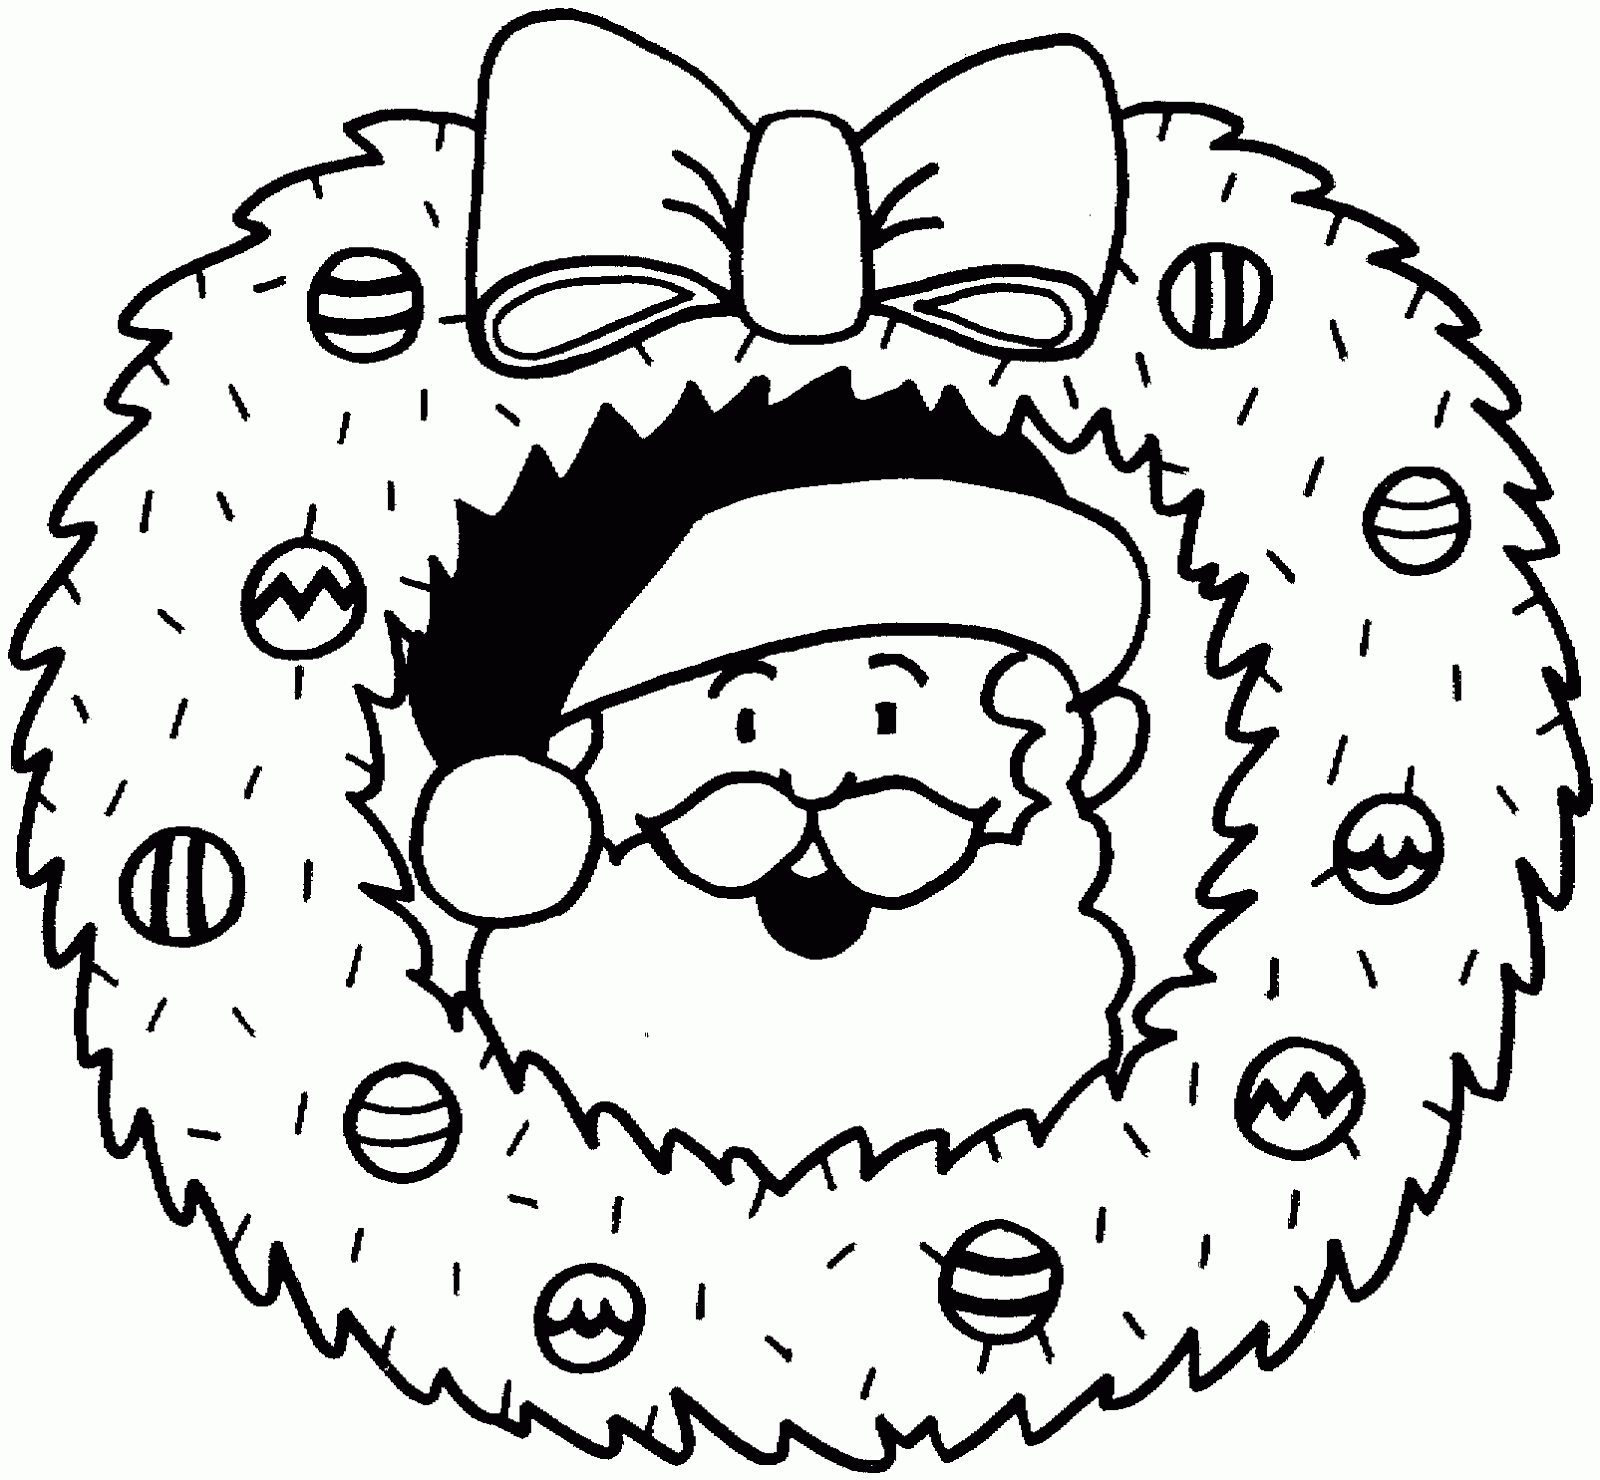 Coloring Pages: Wreaths Coloring Pages Free and Printable